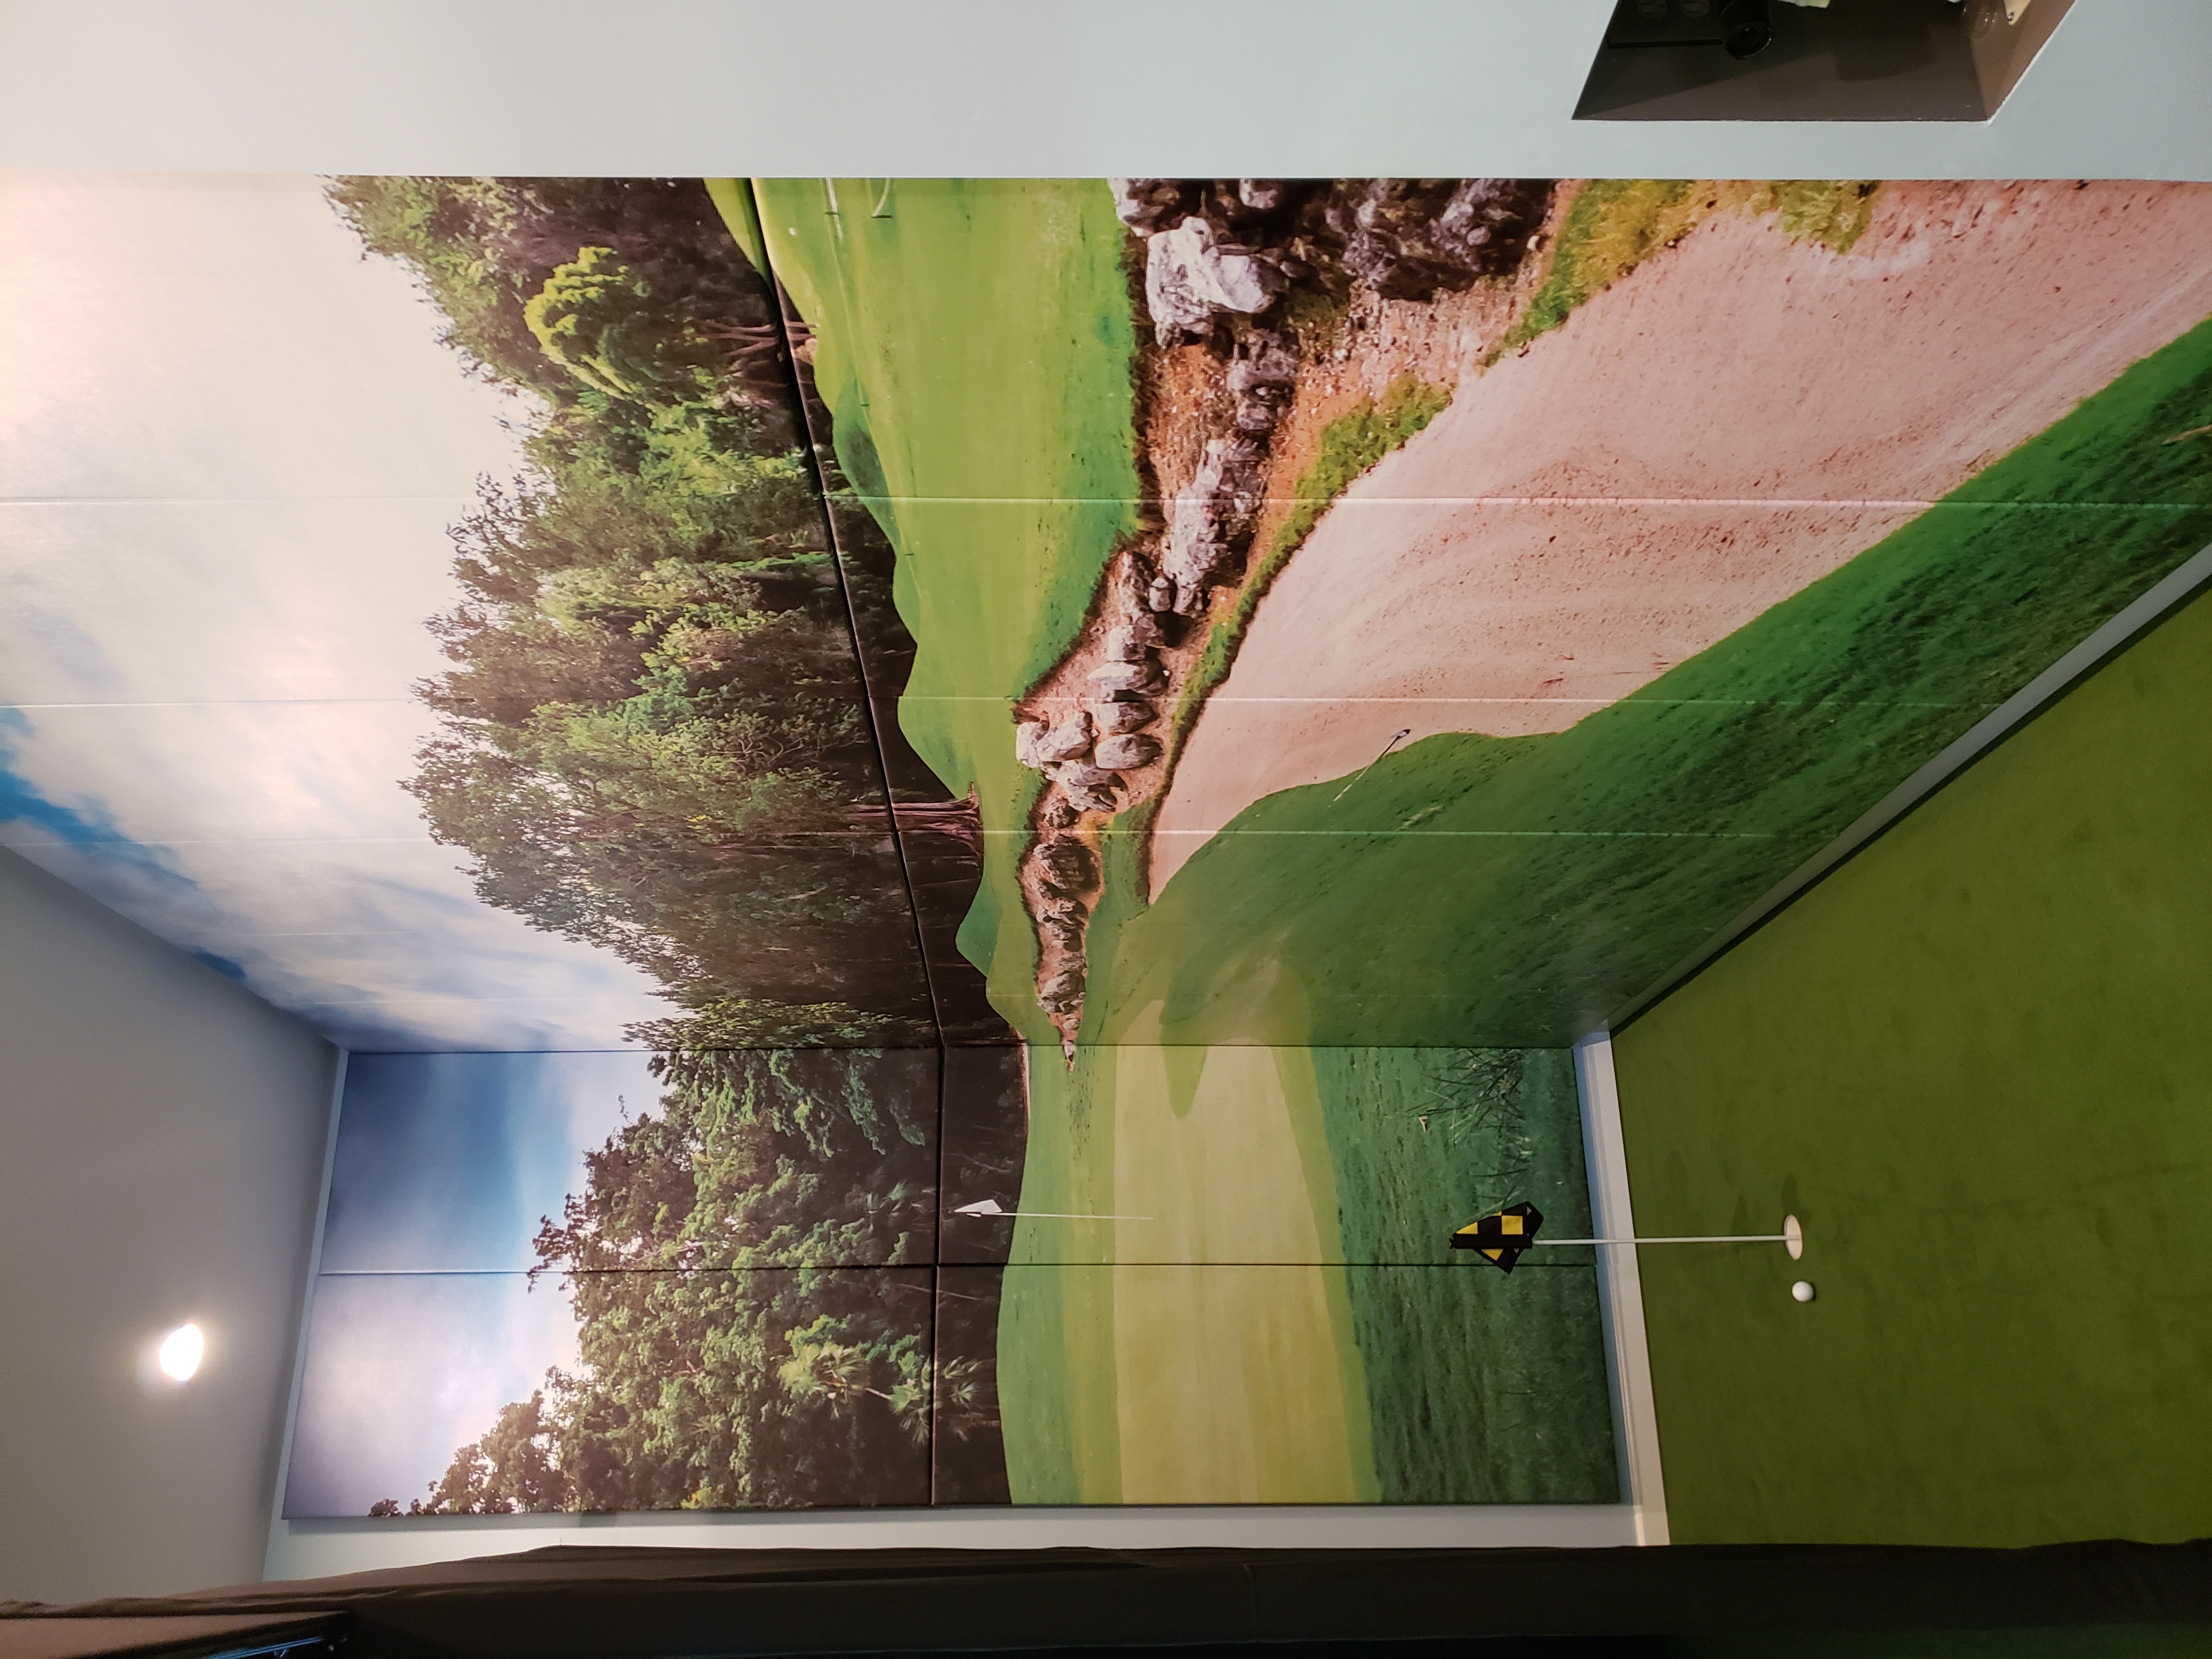 Graphic Image of Golf Course in Golf Simulator Wall Pads 